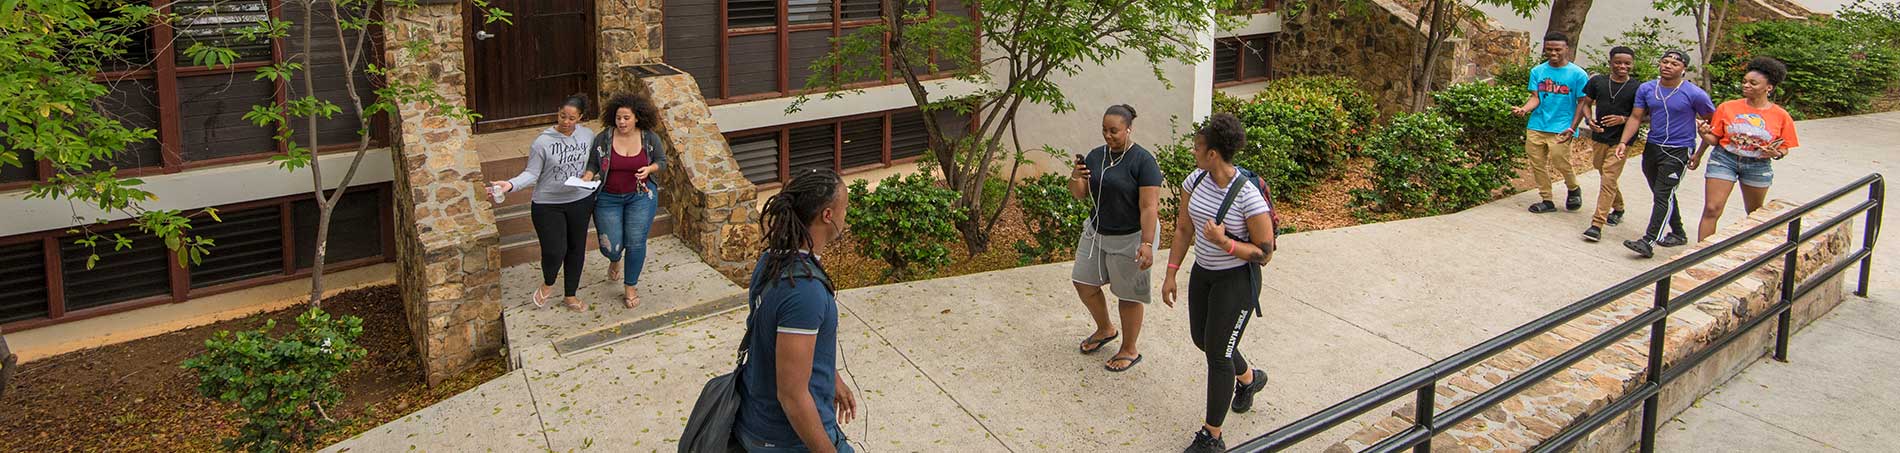 Students on campus grounds